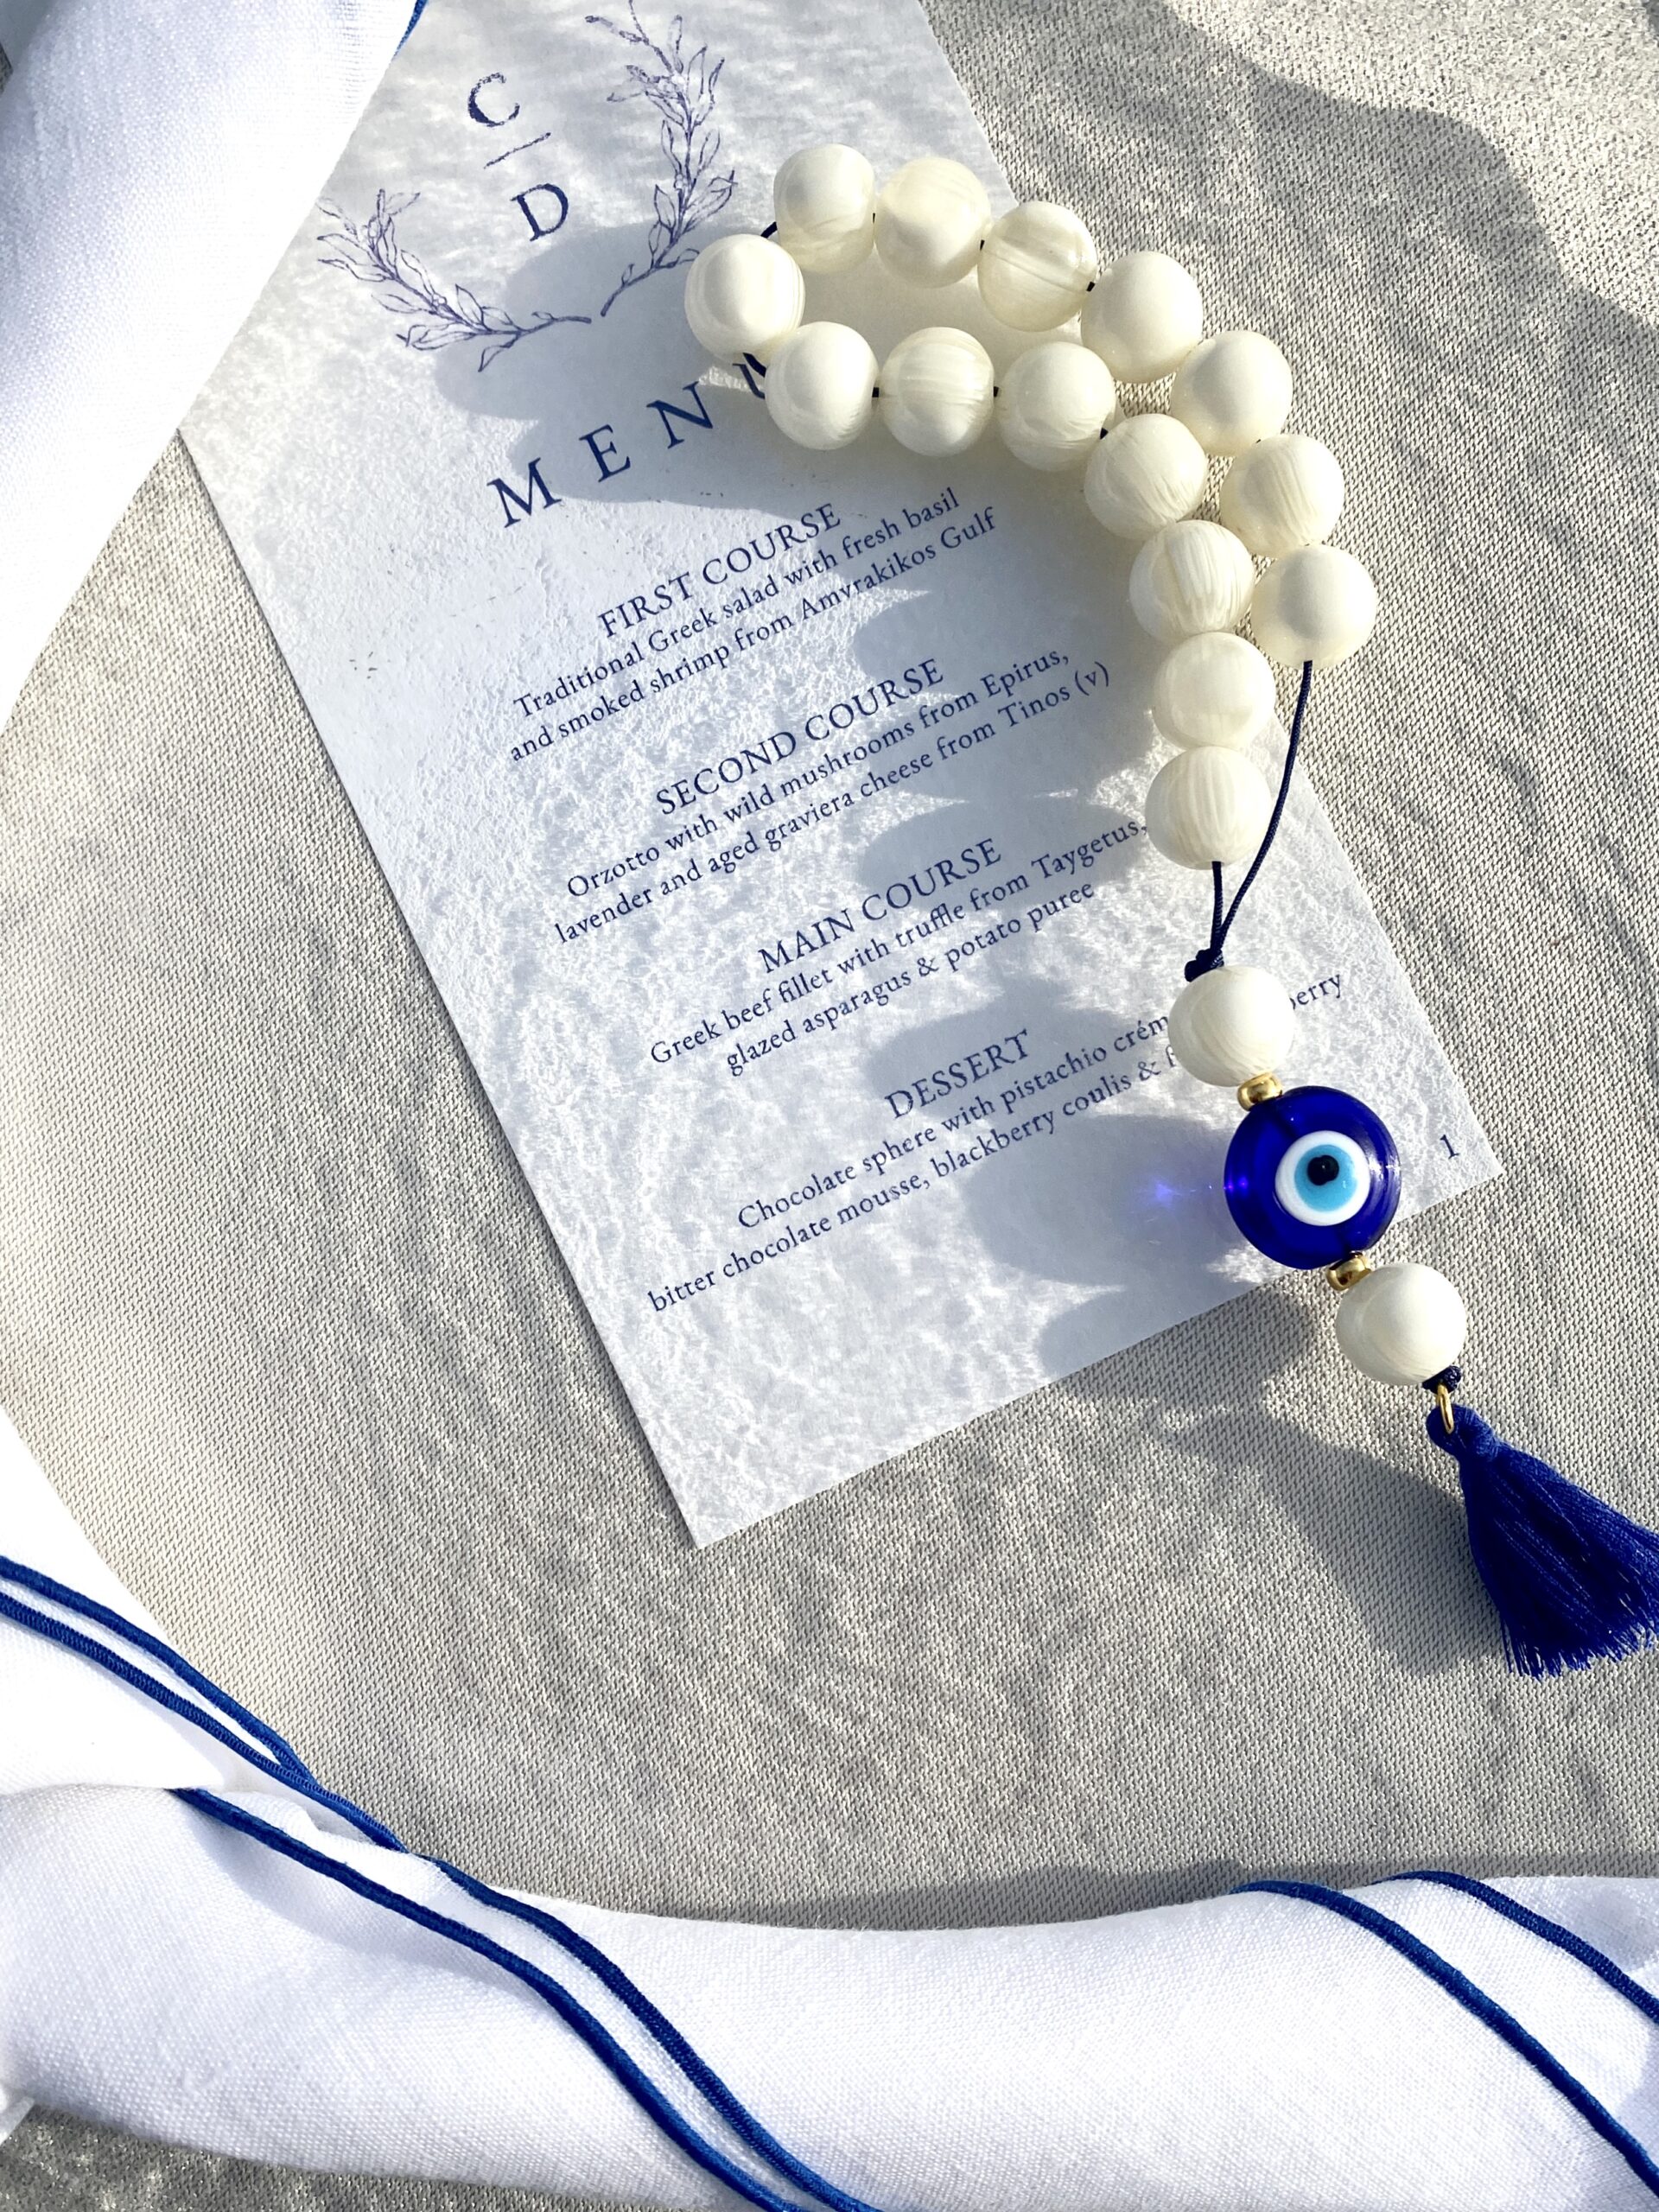 all-about-color-wedding-linen-table-setup-greek-rosary-with-evil-eye